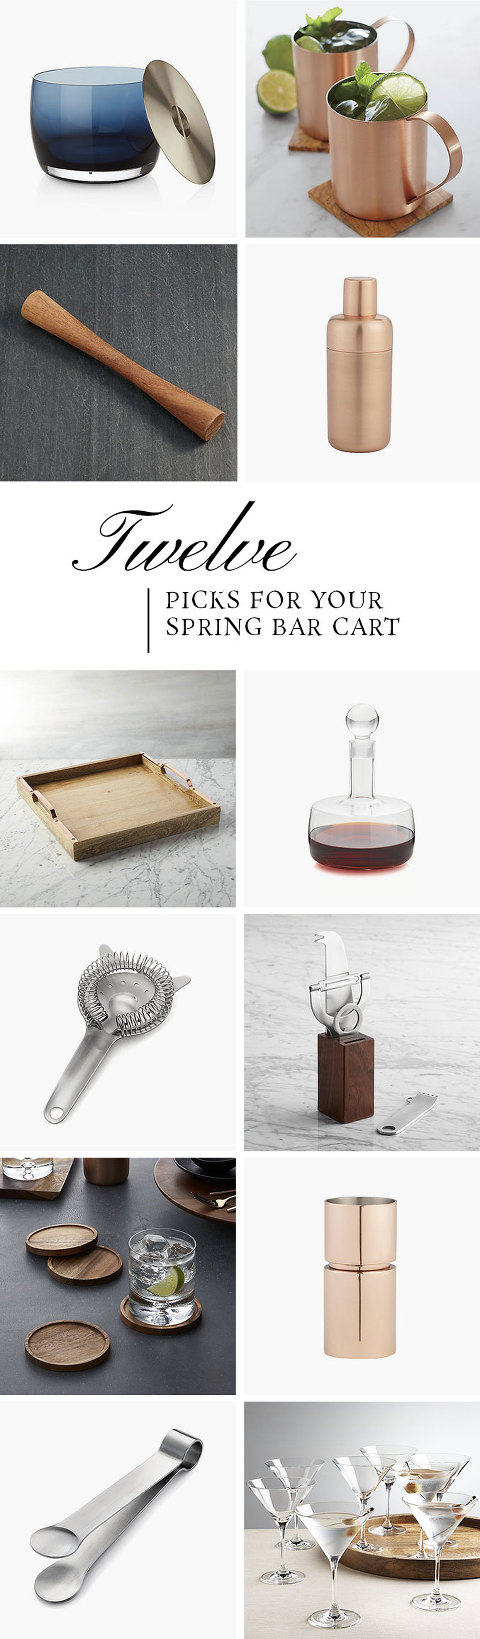 Everything You Need For Your Bar Cart | dreamgreendiy.com